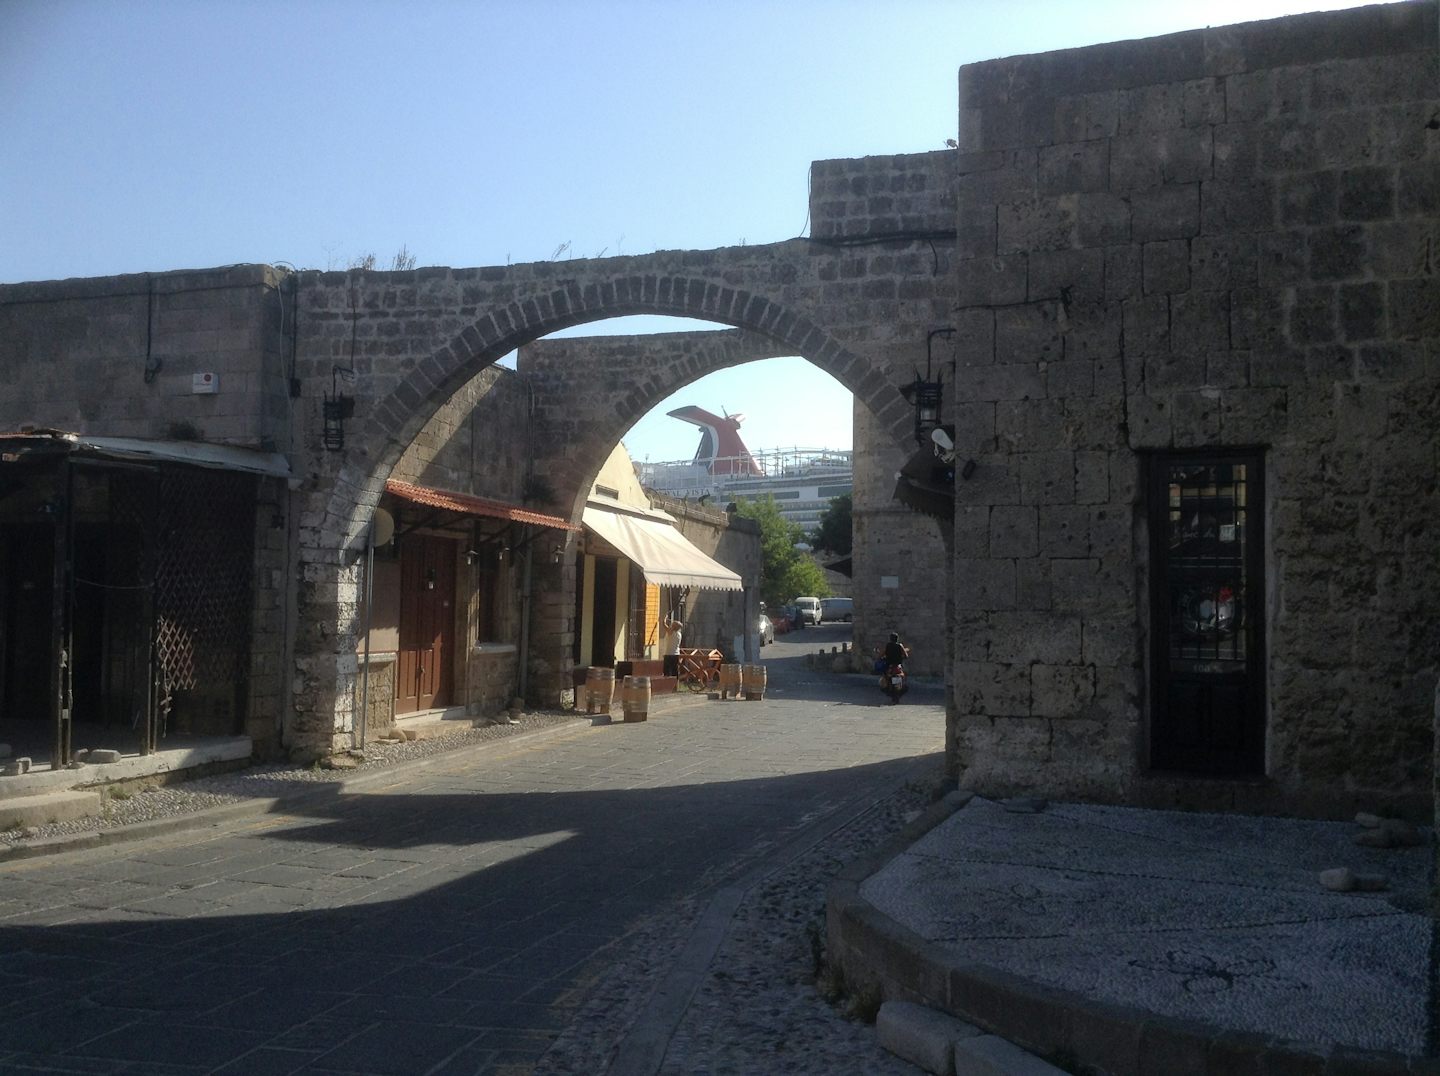 View of Carnival Vista from streets of Ancient Rhodes, June 23, 2016.